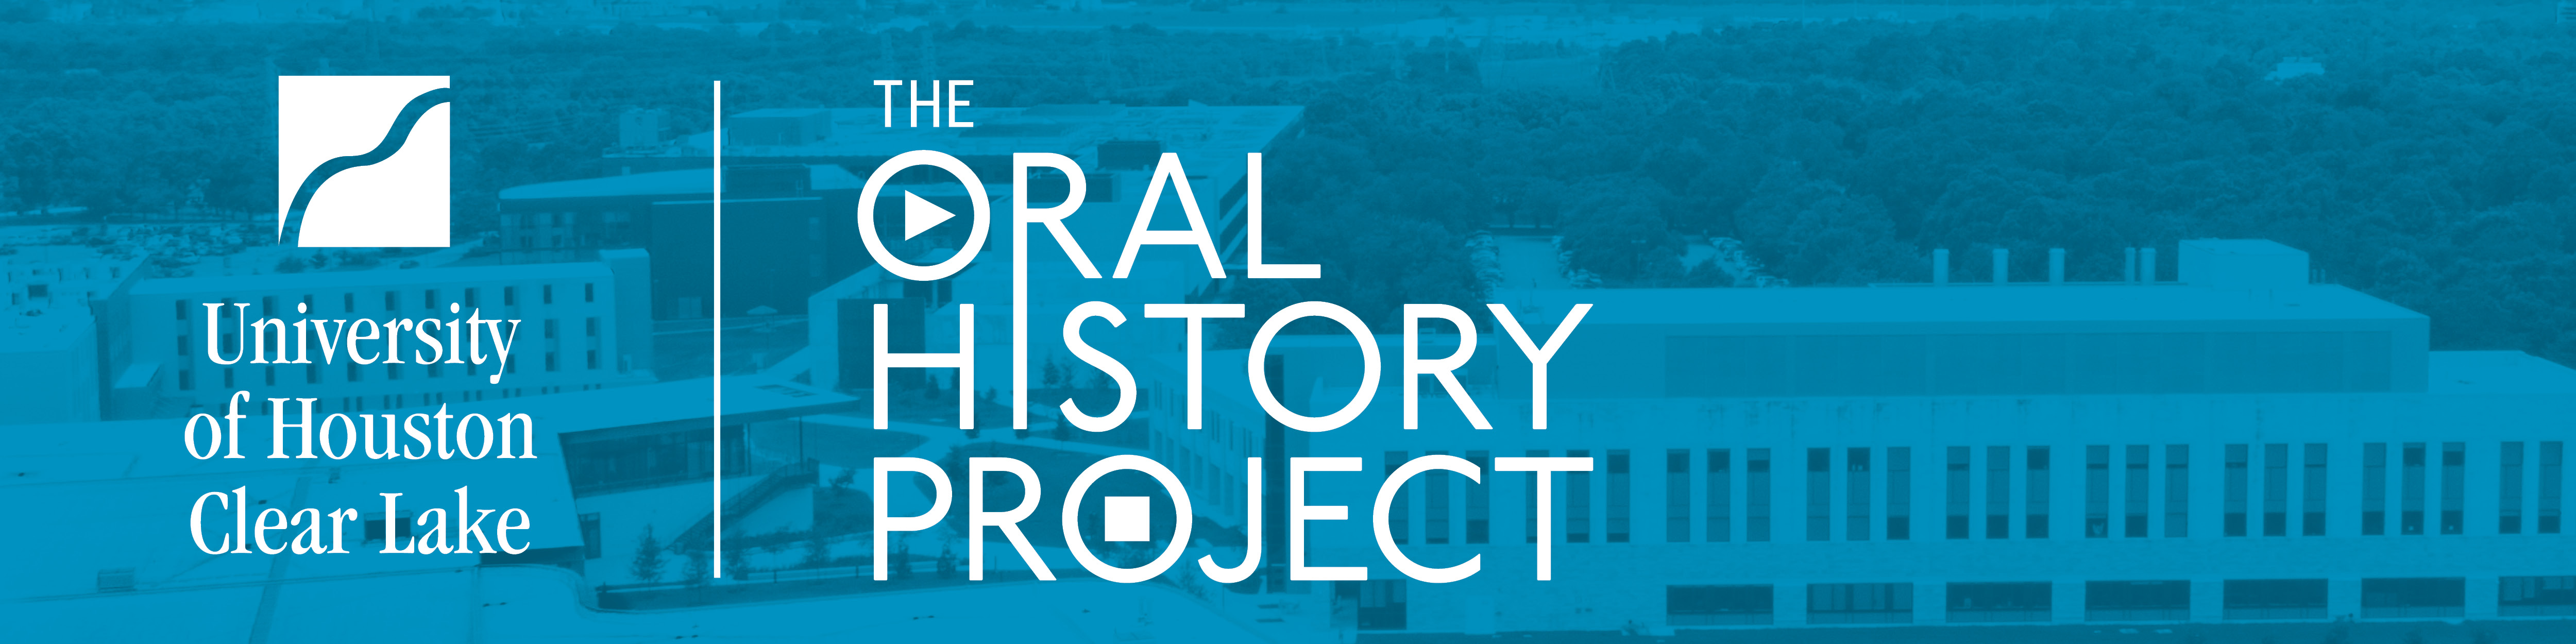 Oral History Project email banner